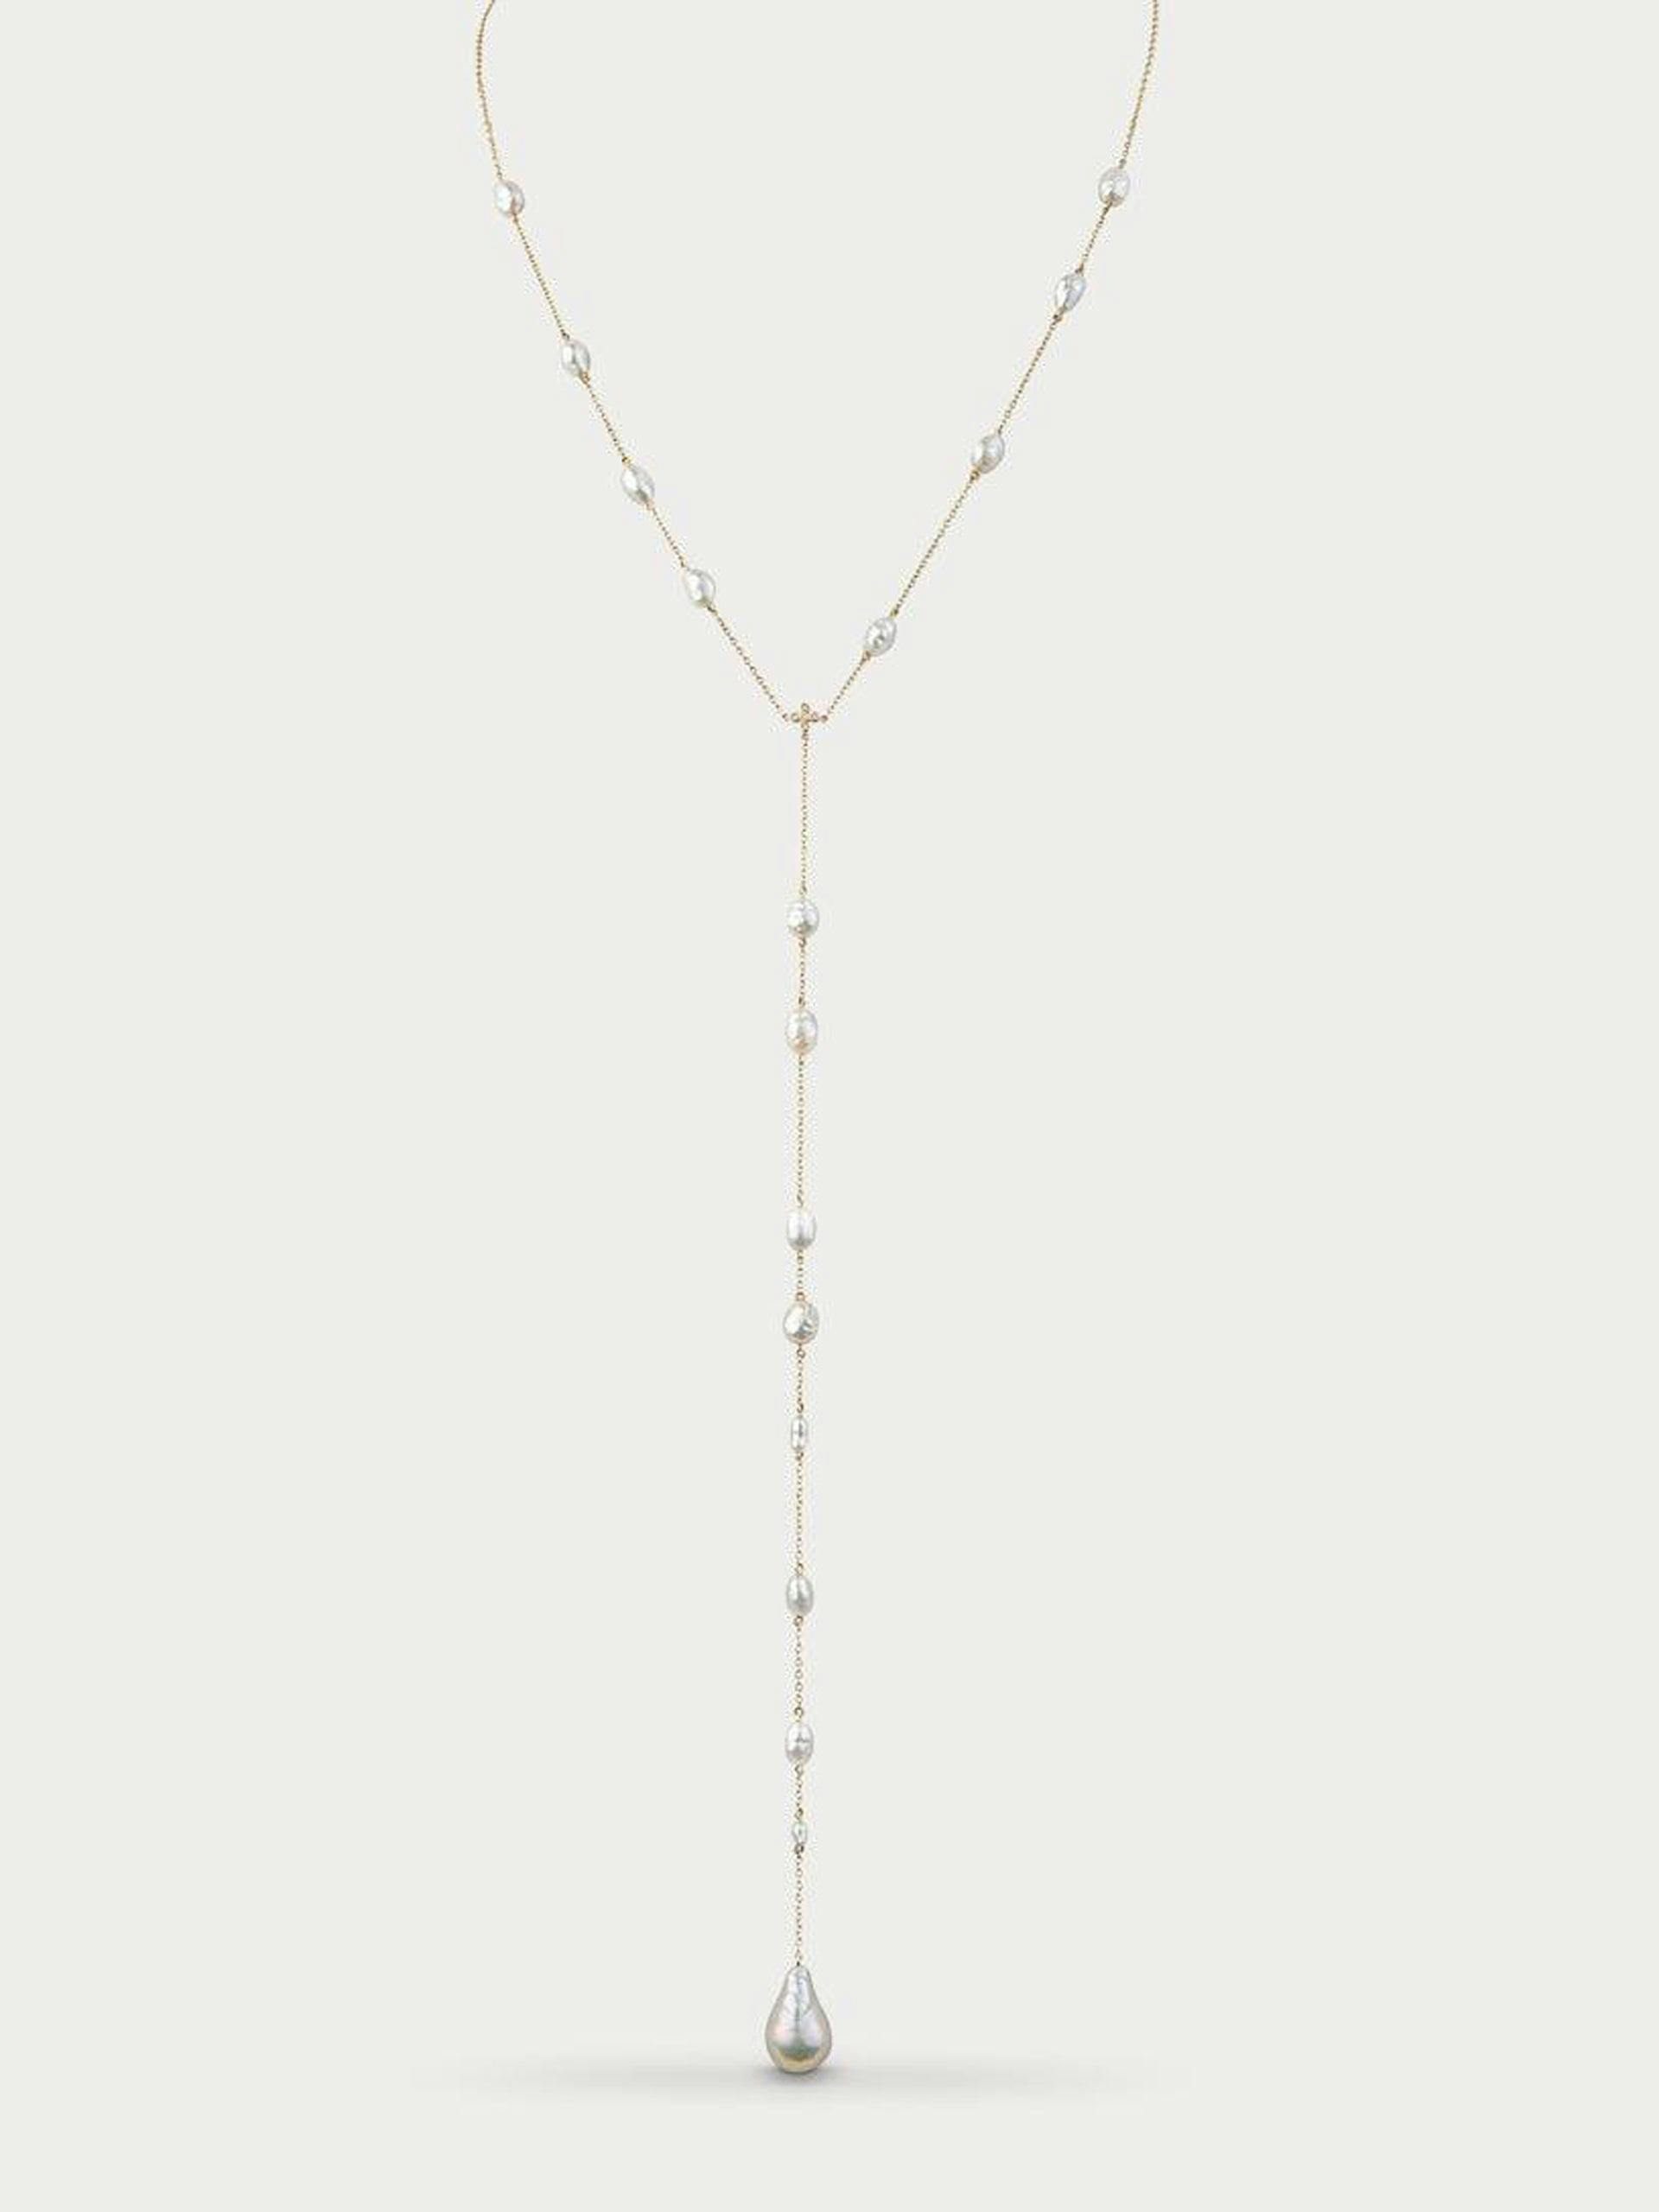 Pearl and diamond lariat necklace